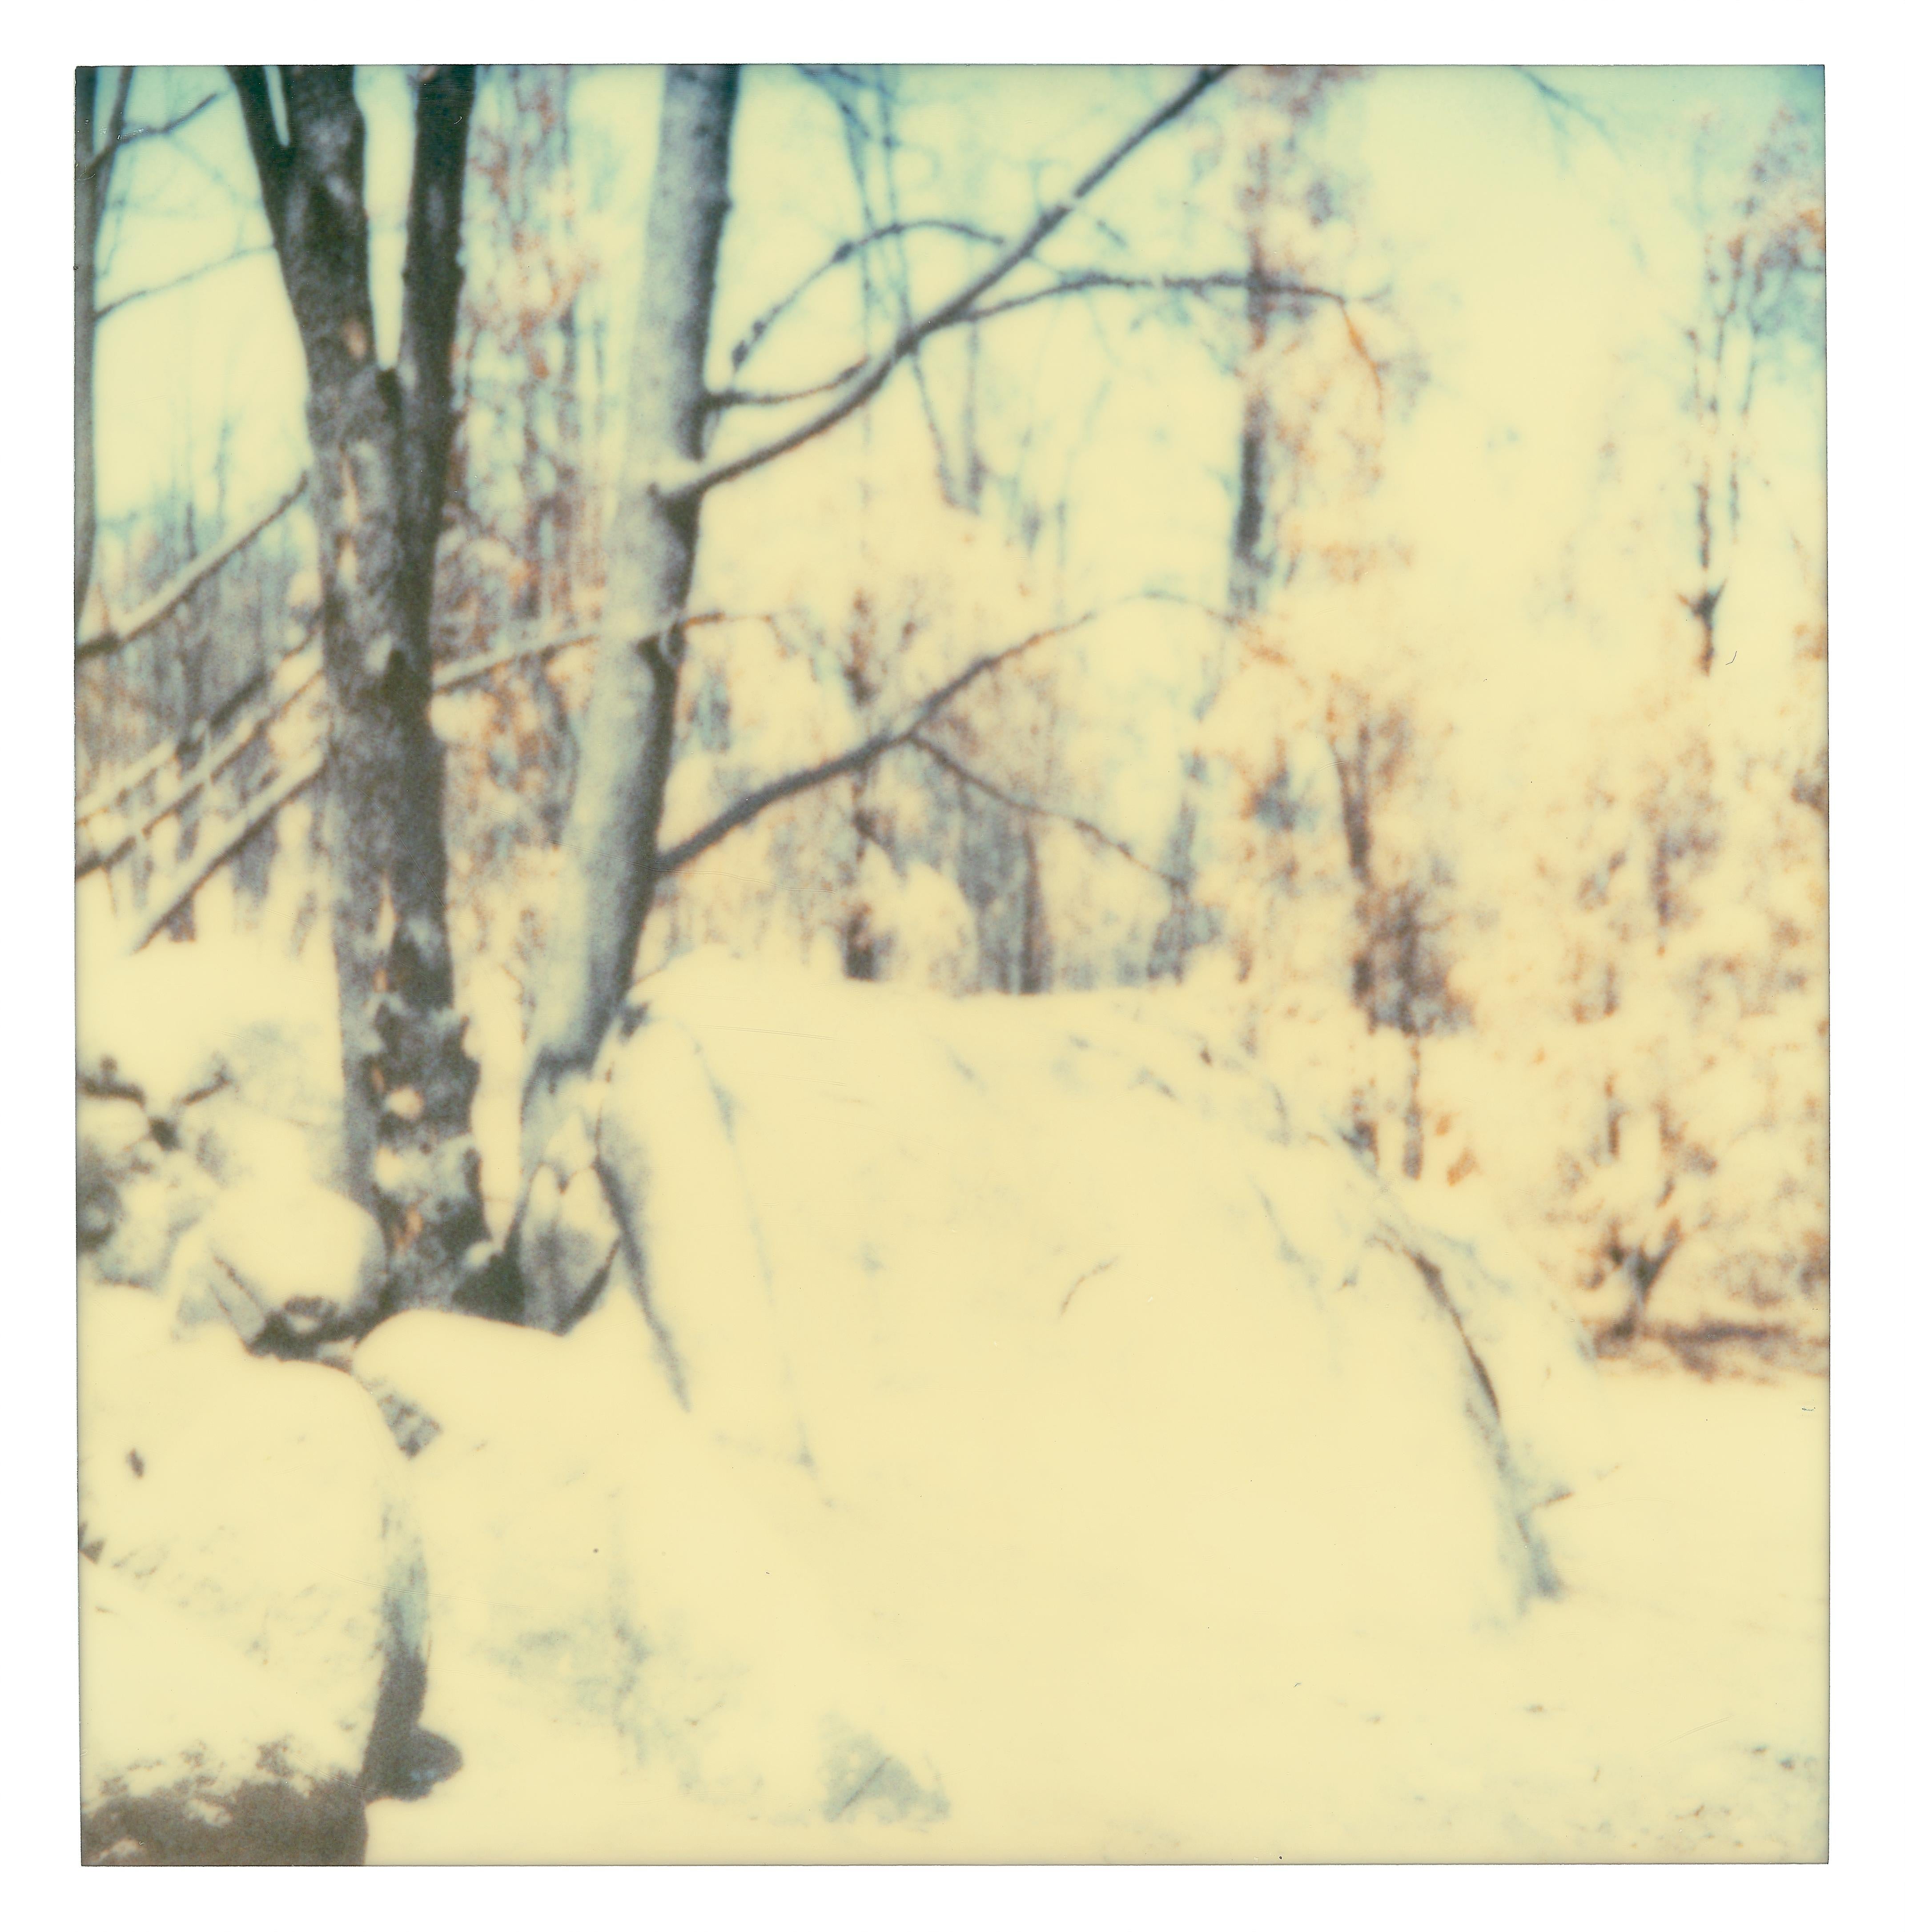 Traces (Stranger than Paradise) - analog, mounted, Polaroid, Contemporary - Photograph by Stefanie Schneider